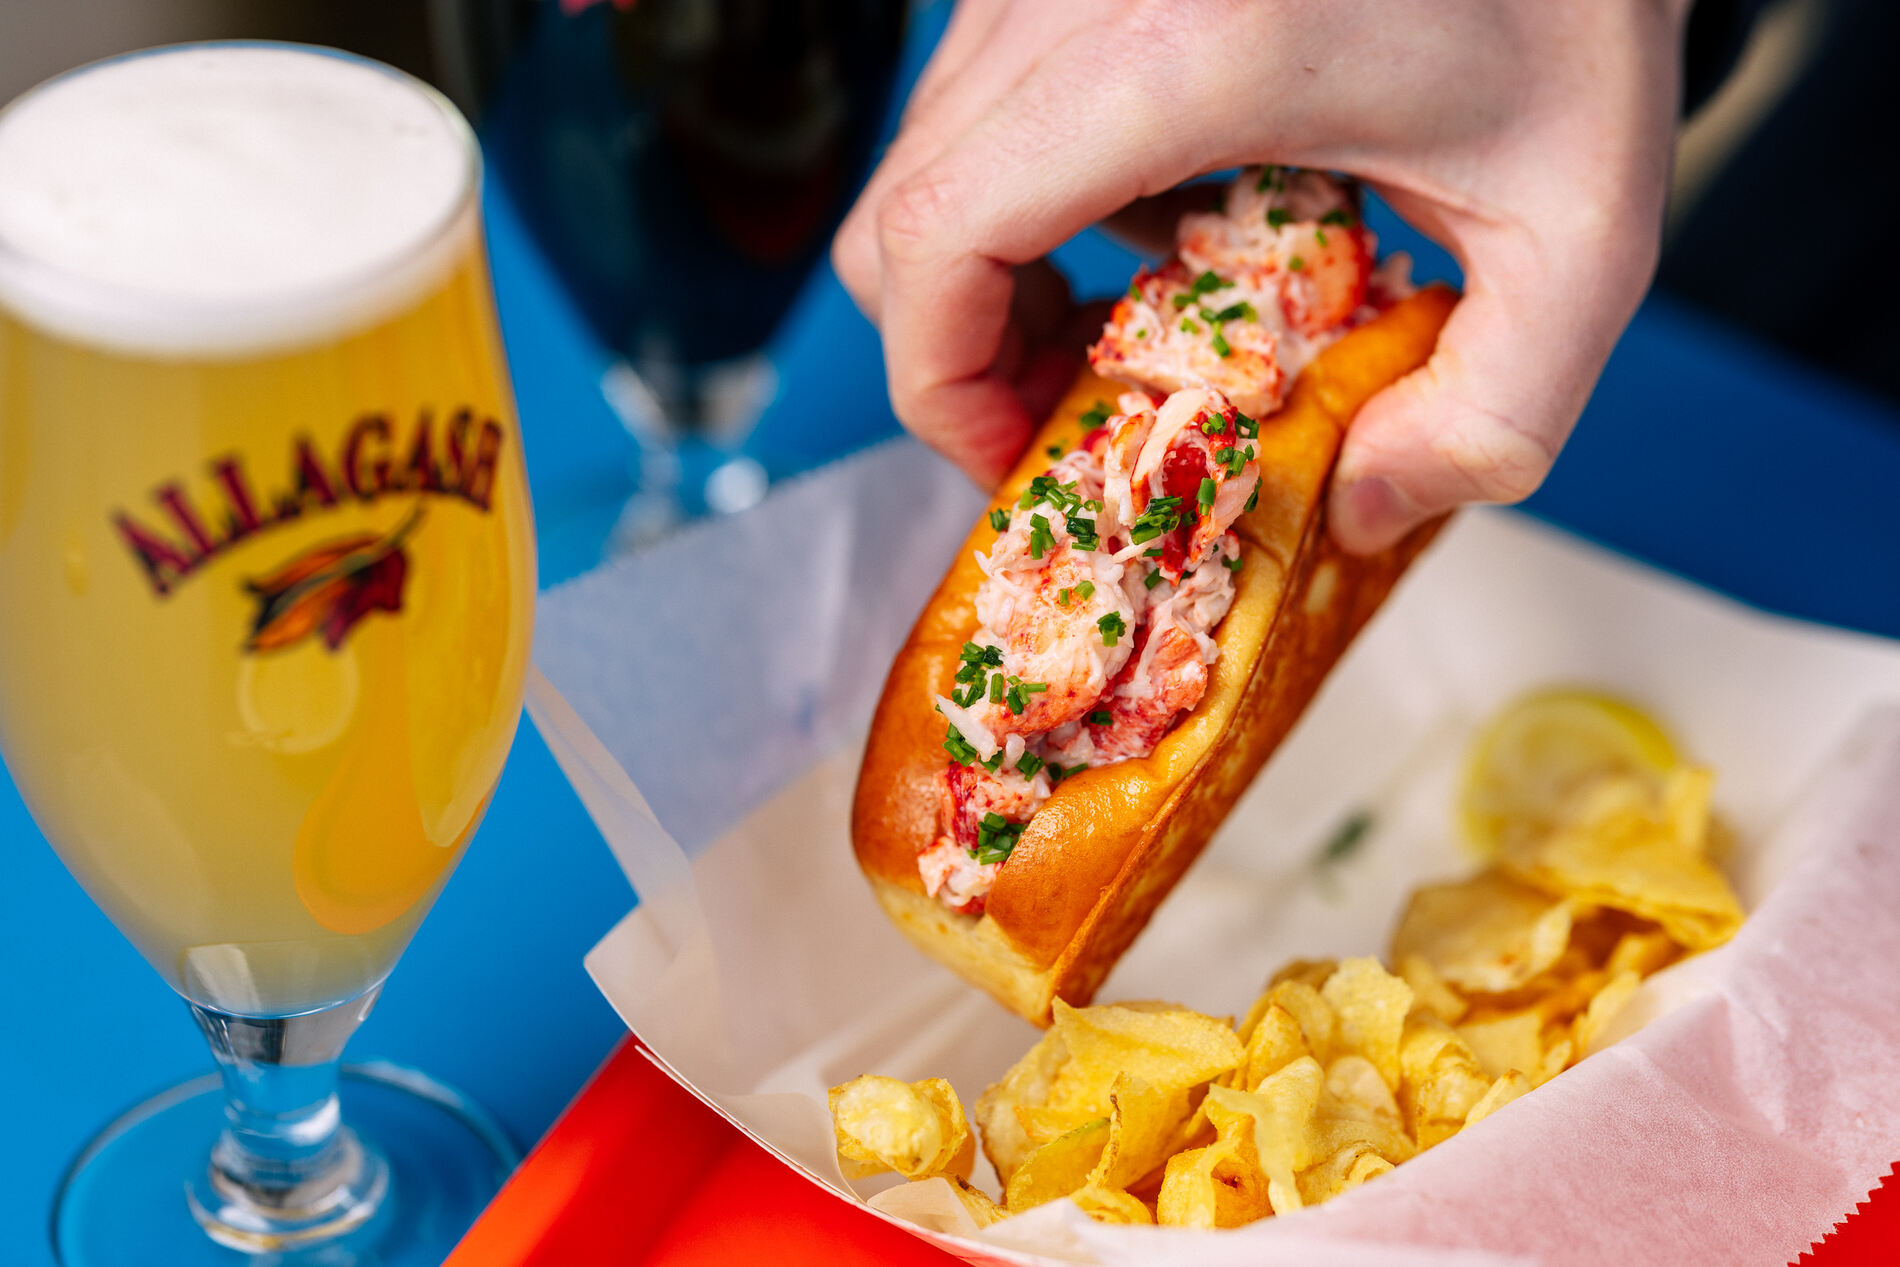 Lobster rolls available in the Allagash tasting room from Bite Into Maine